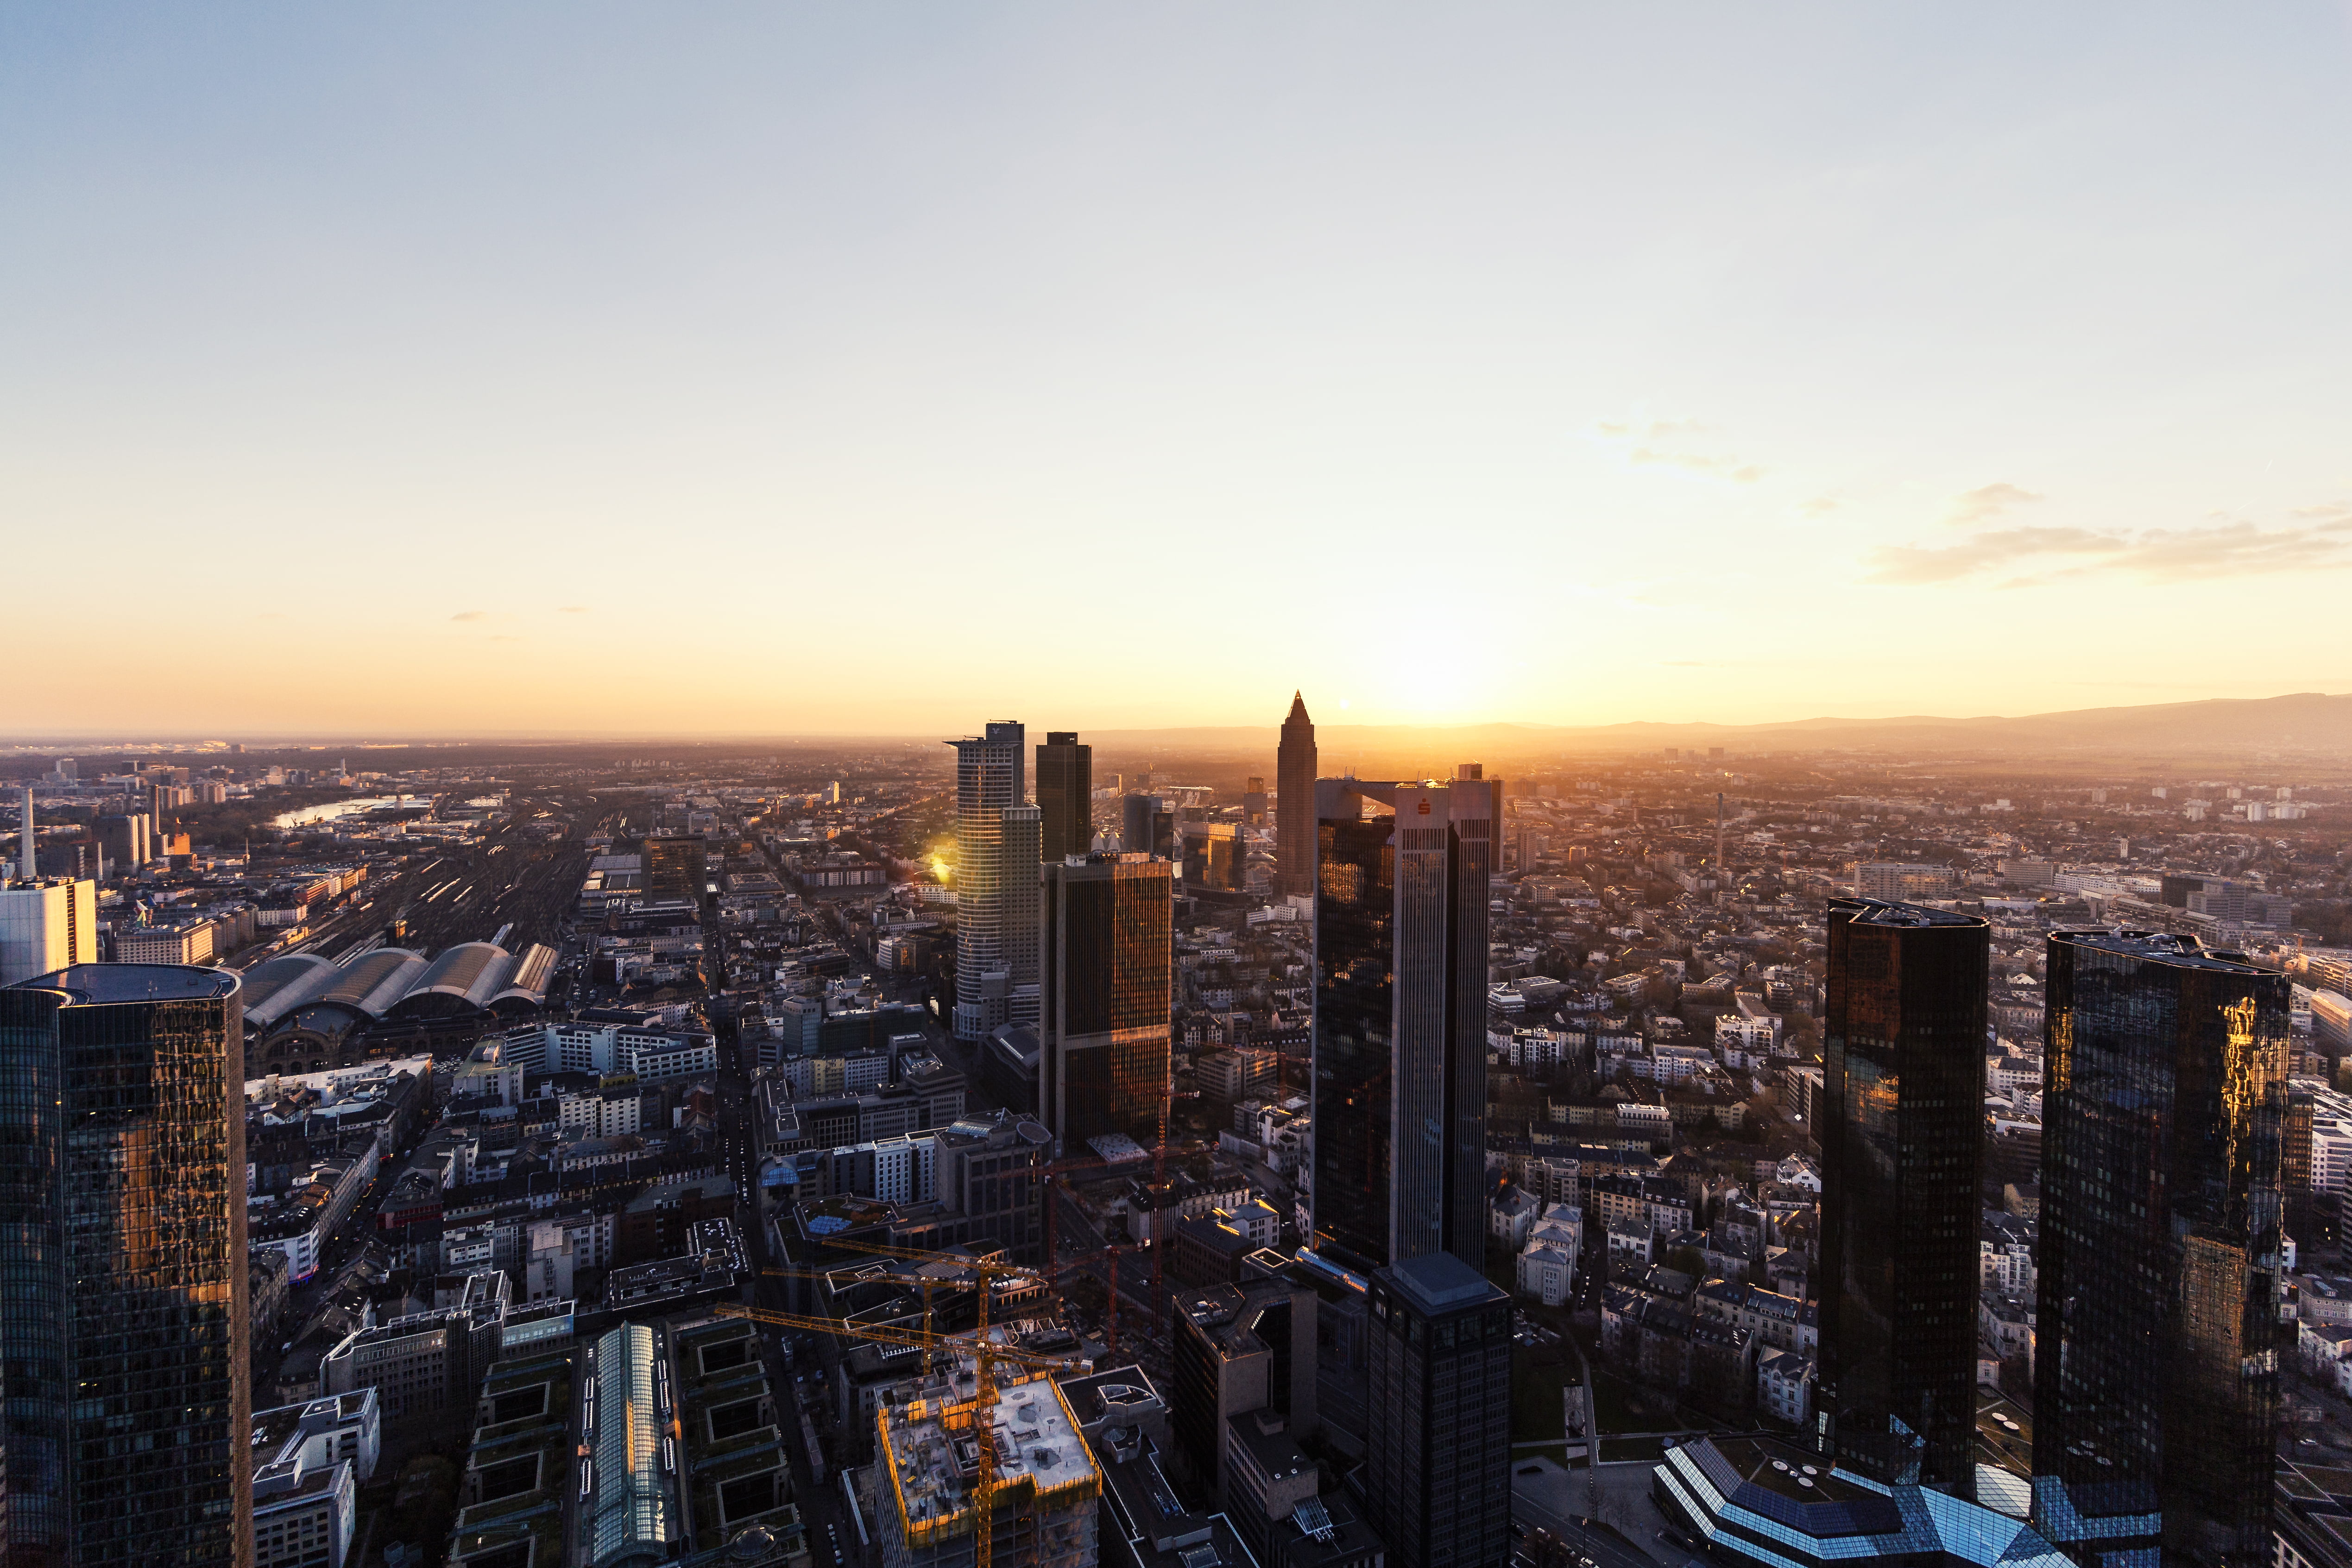 city buildings during sunset in aerial photography, frankfurt